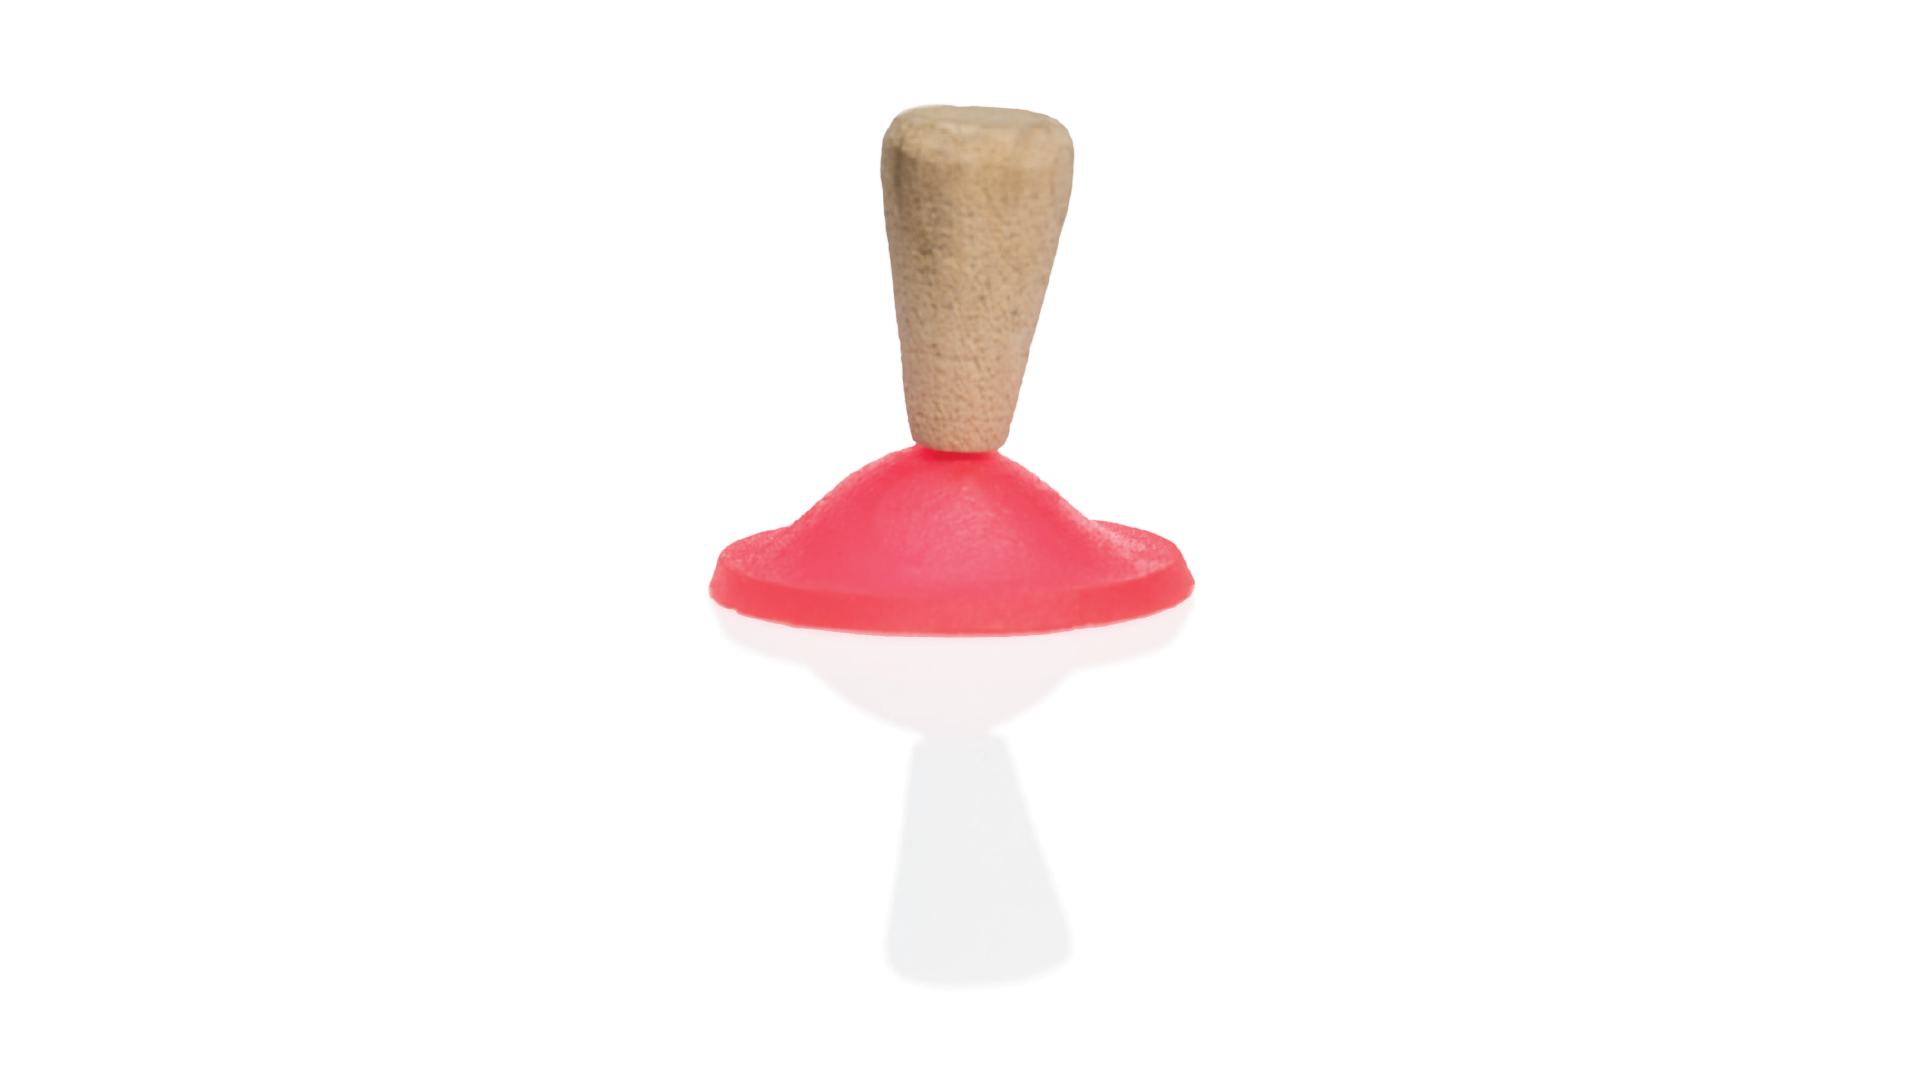 Mushroom toy is upside down with its cap inverted and placed on the floor.